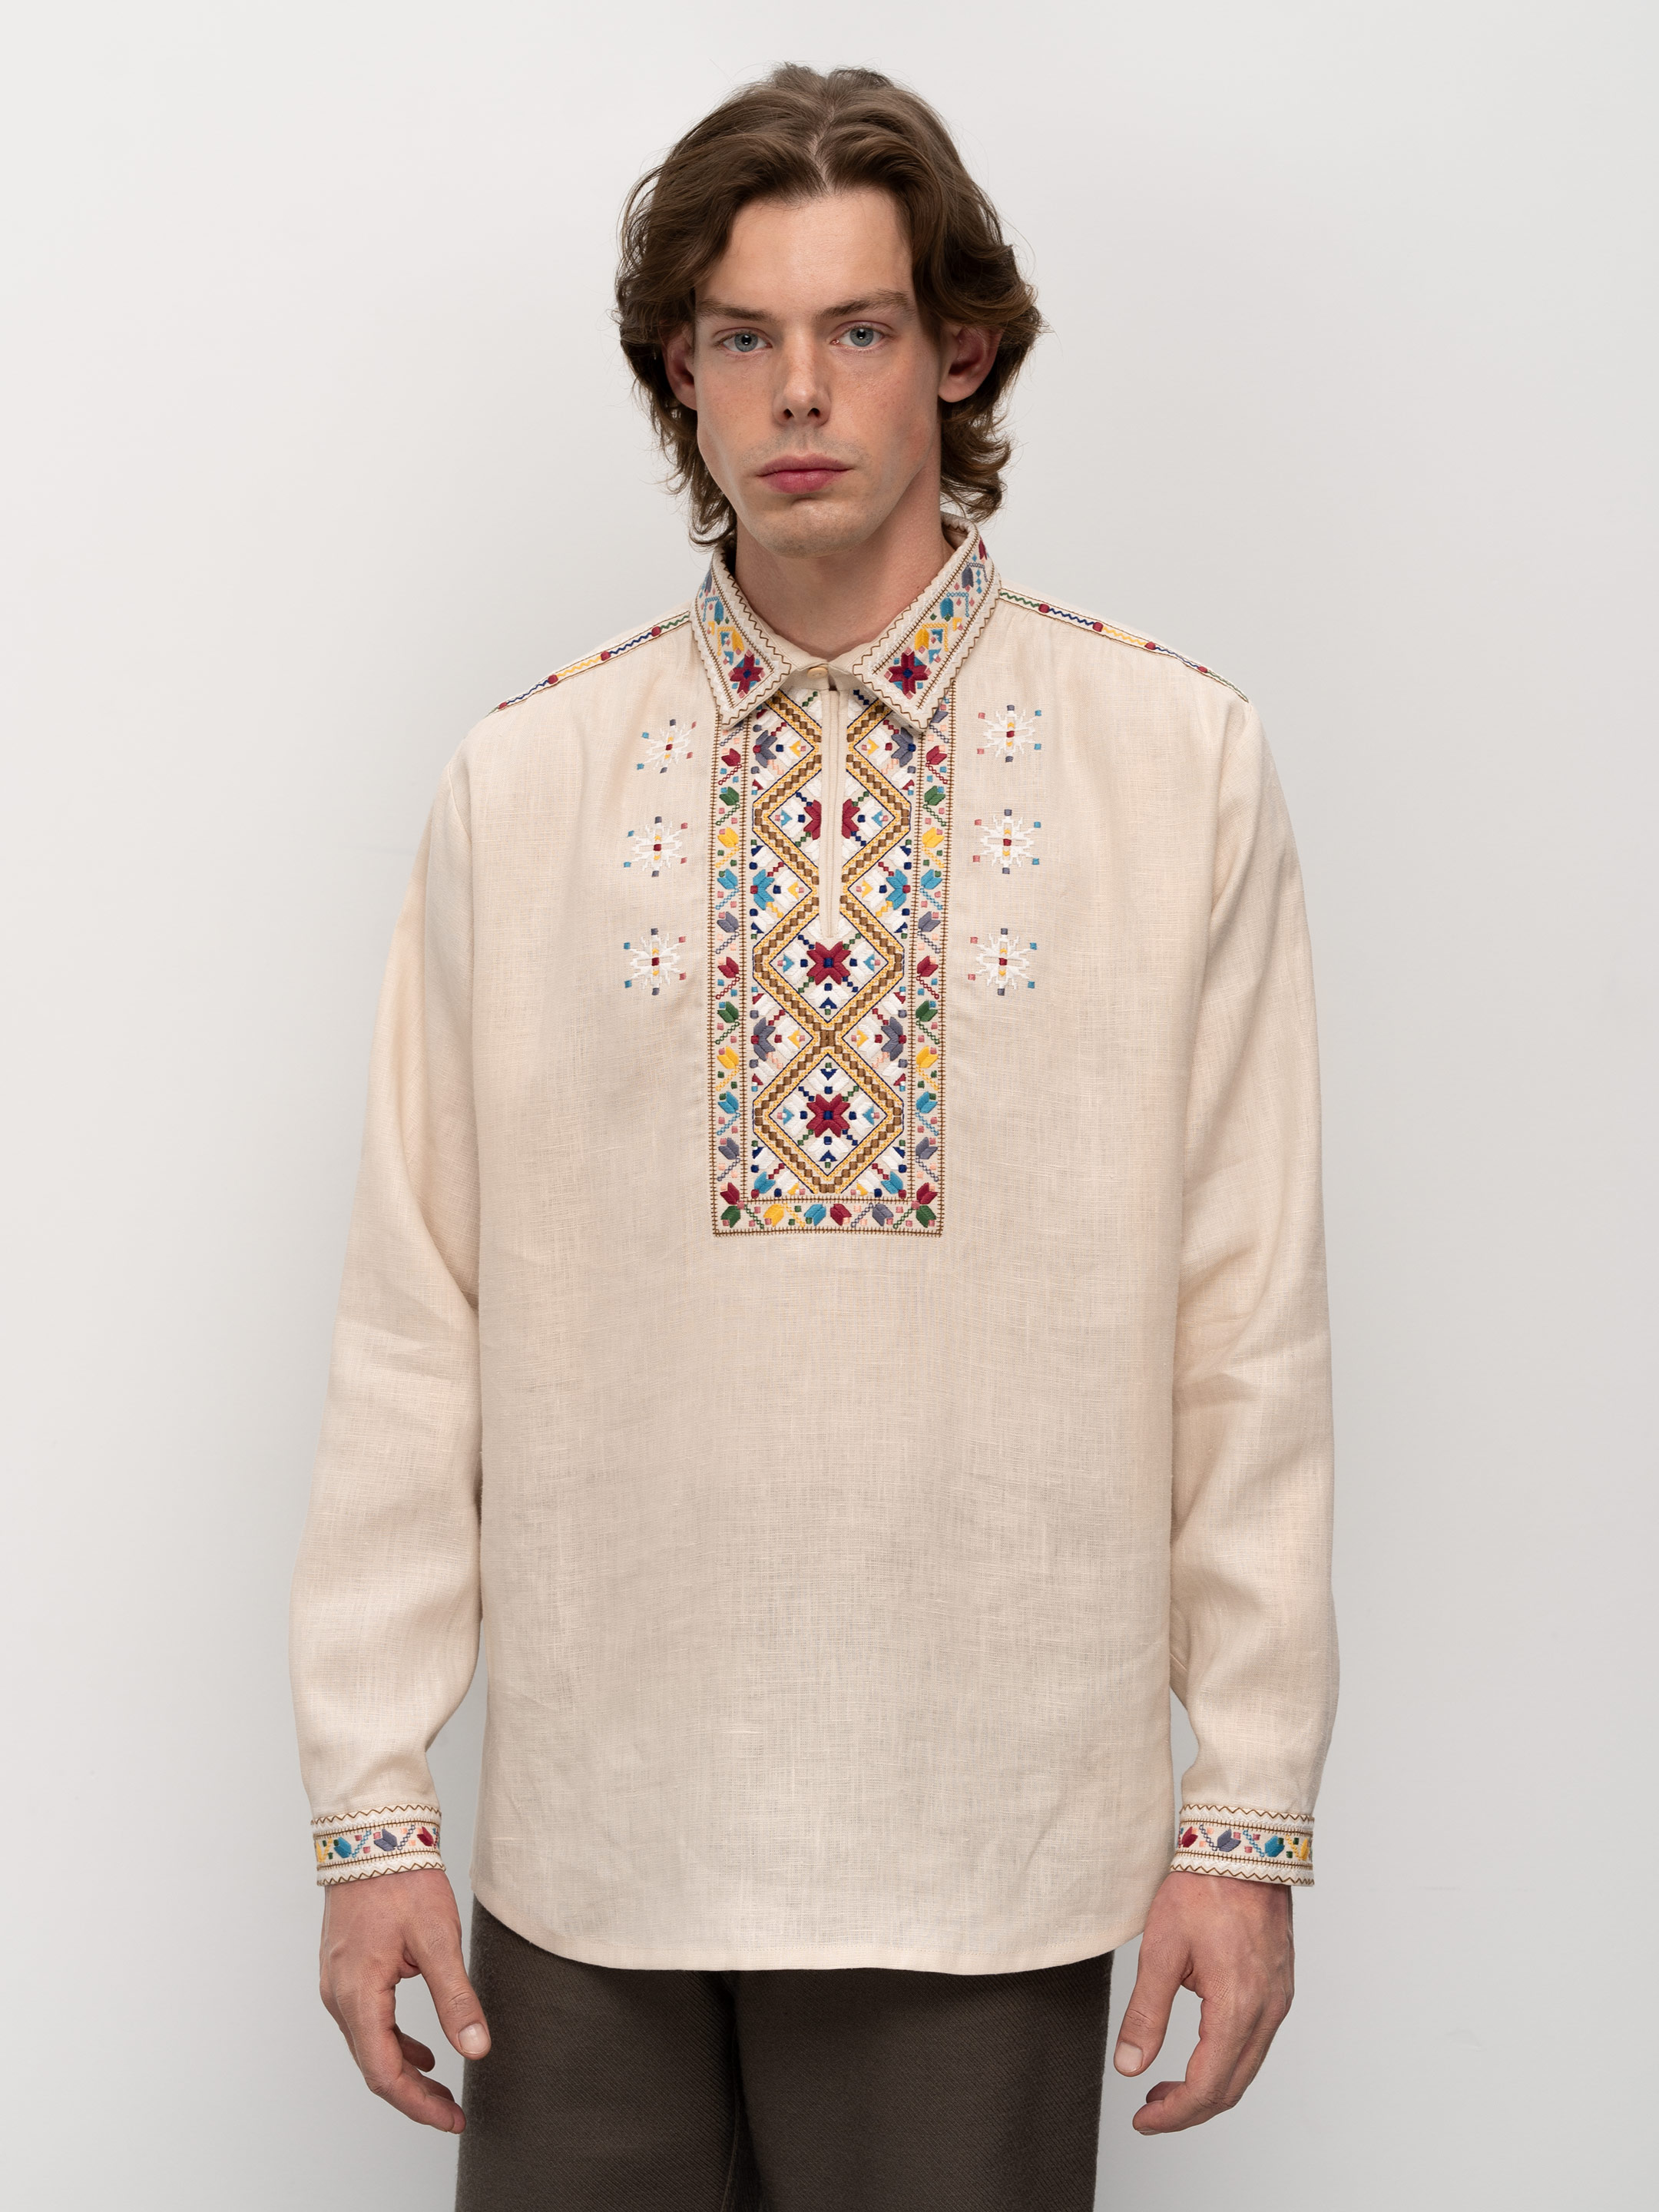 Men's embroidered shirt with collar Veremiy - photo 1